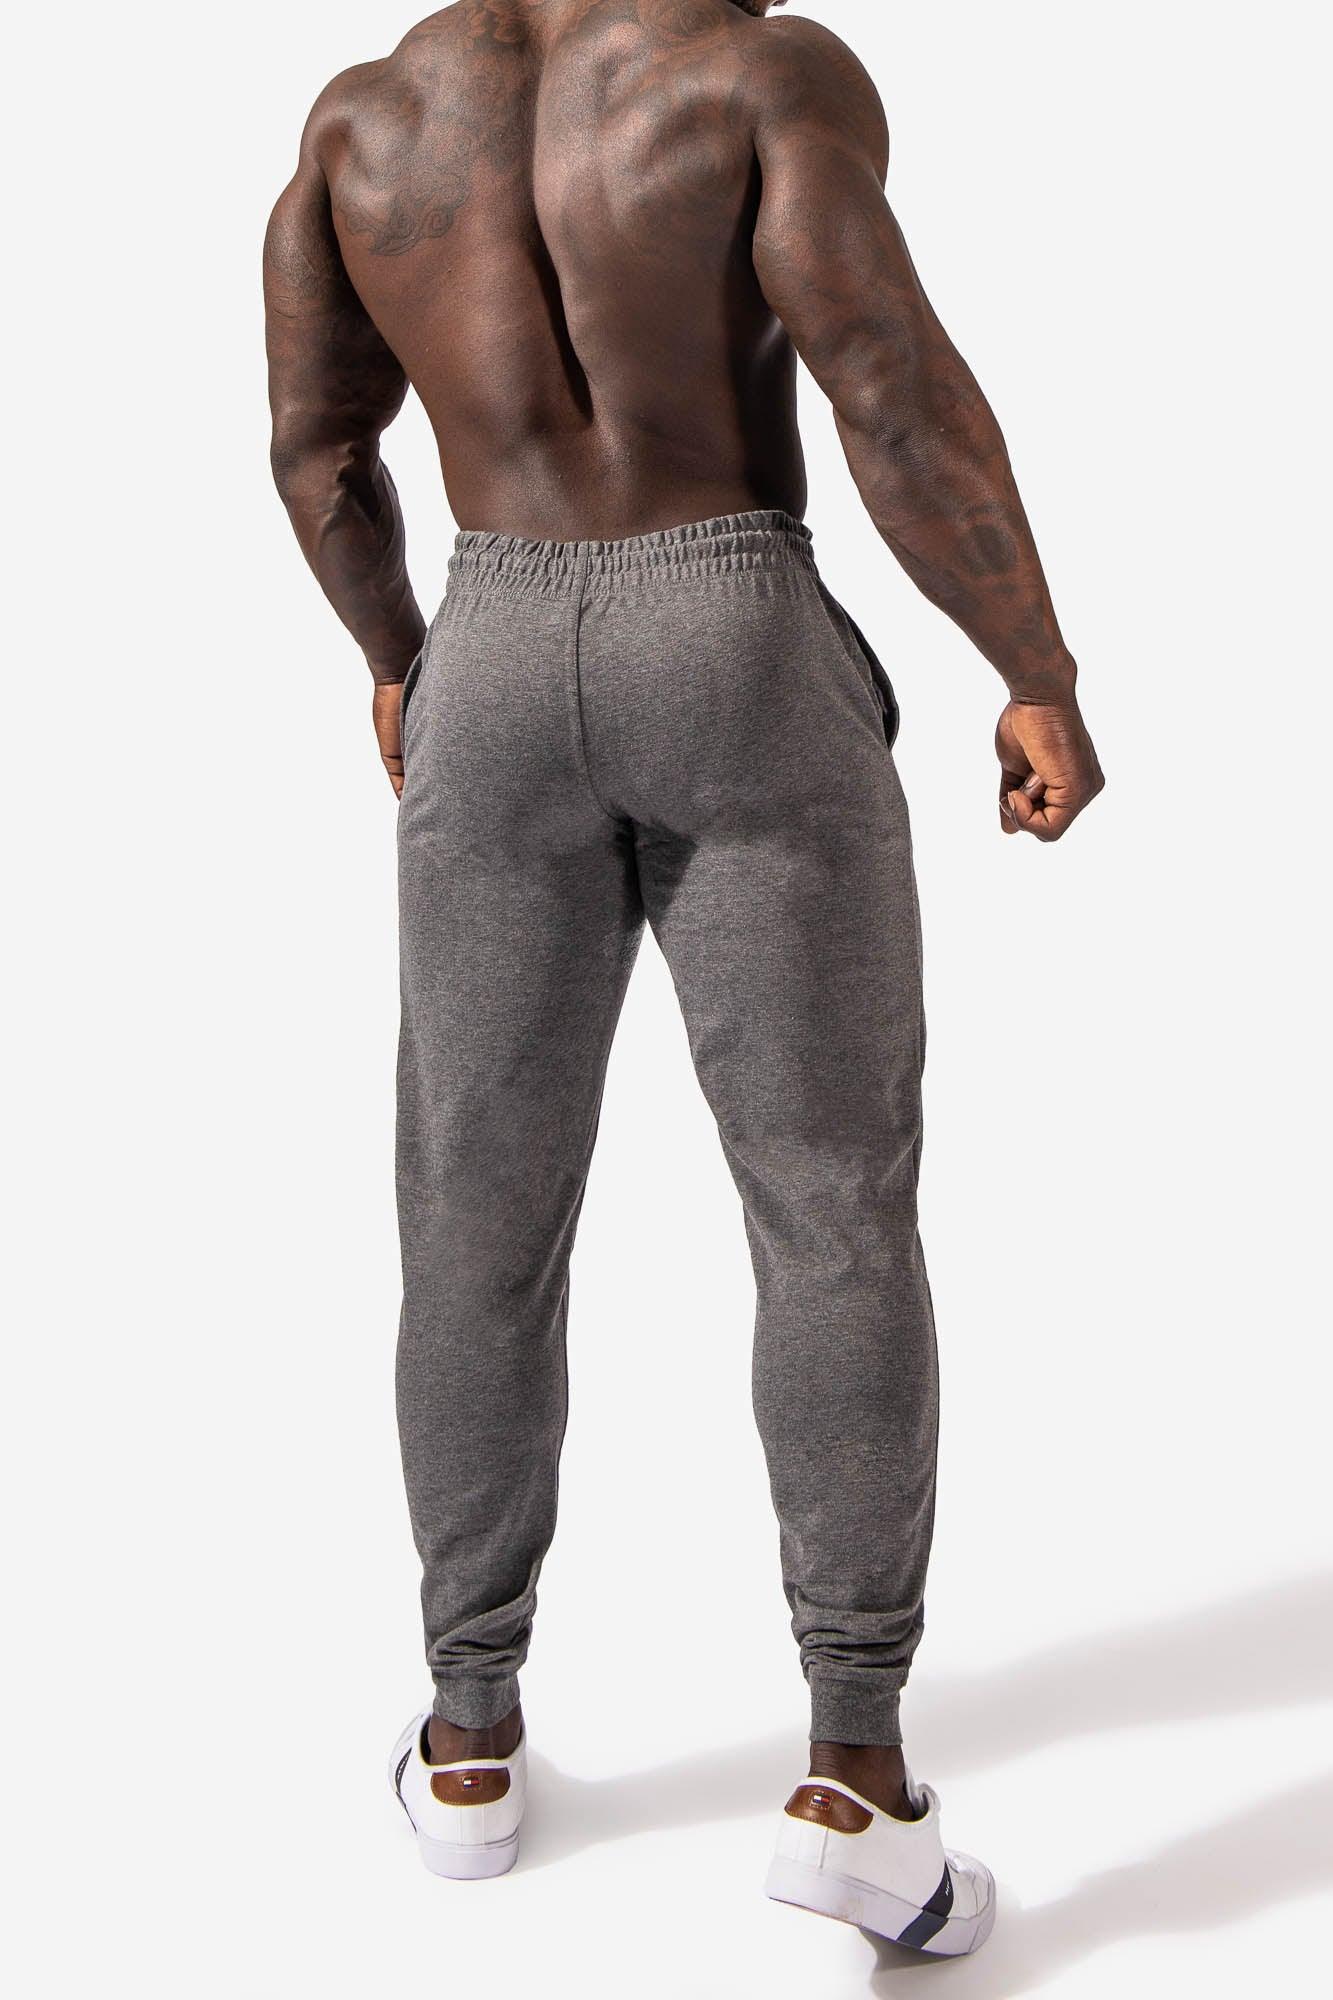 Workout Joggers for Men, Bodybuilding & Fitness Gym Wear, Jed North